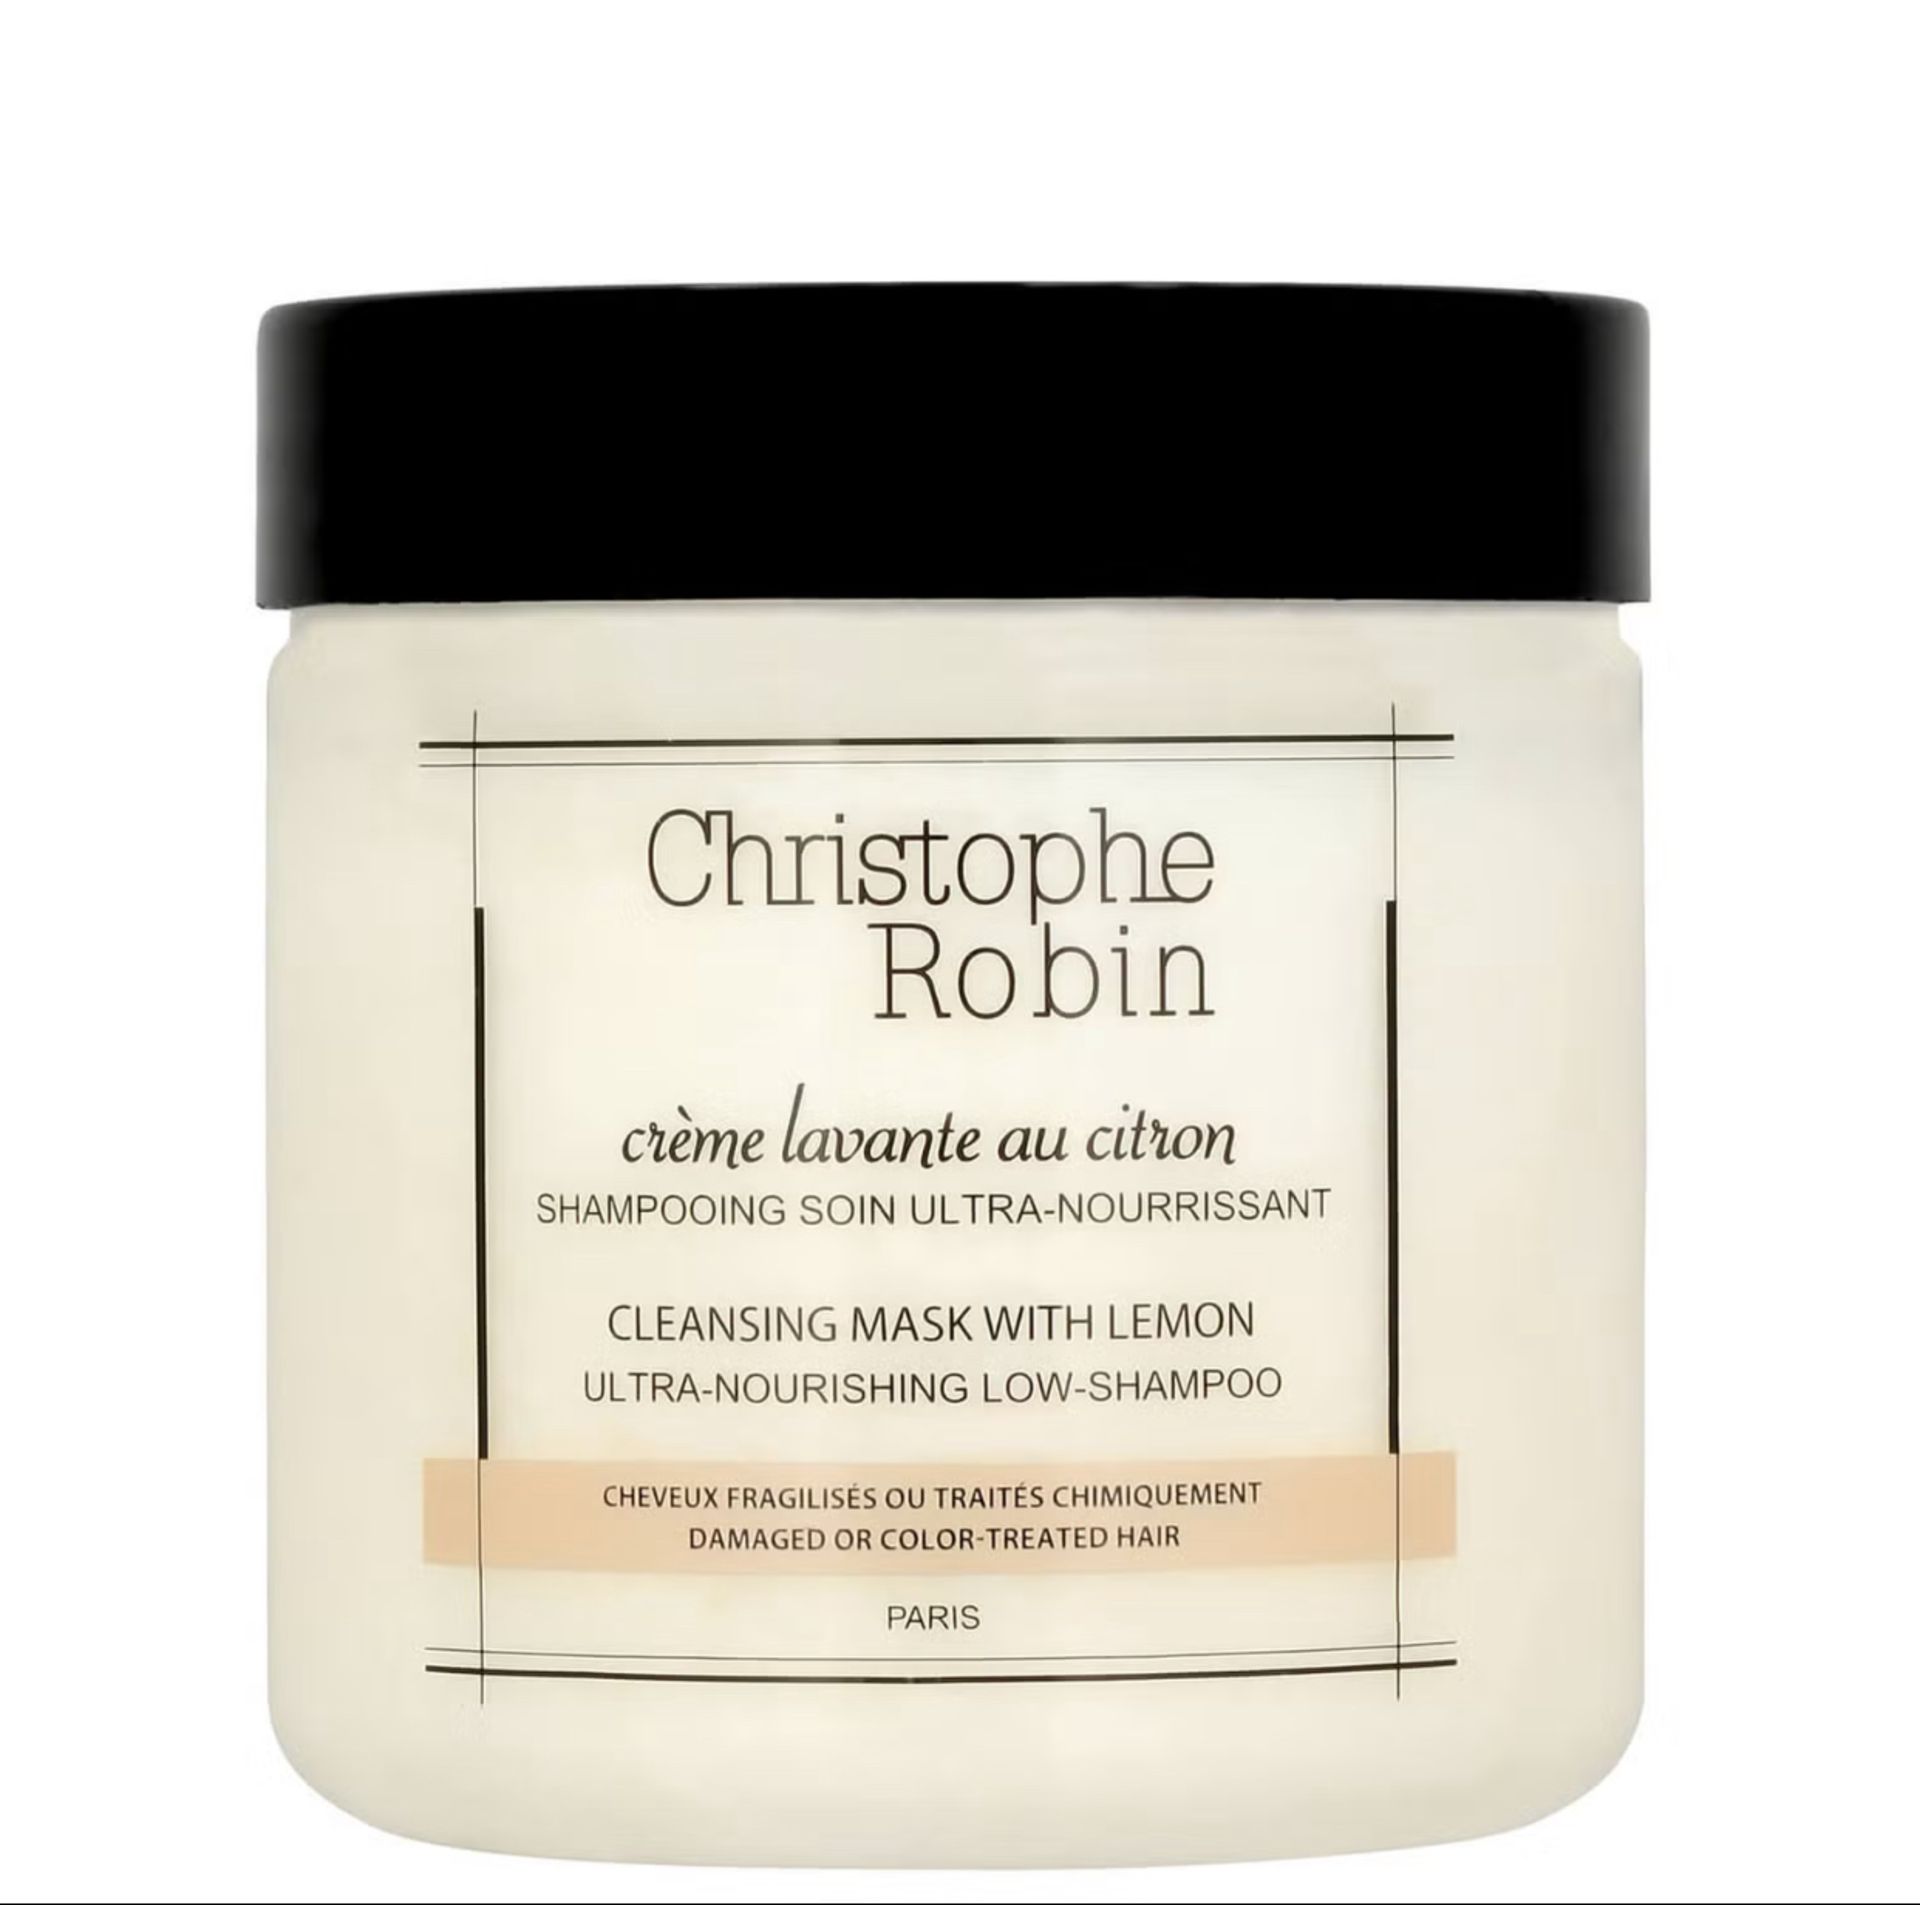 80 X CHRISTOPHE ROBIN CLEANSING MASK WITH LEMON 250ML RRP £2960